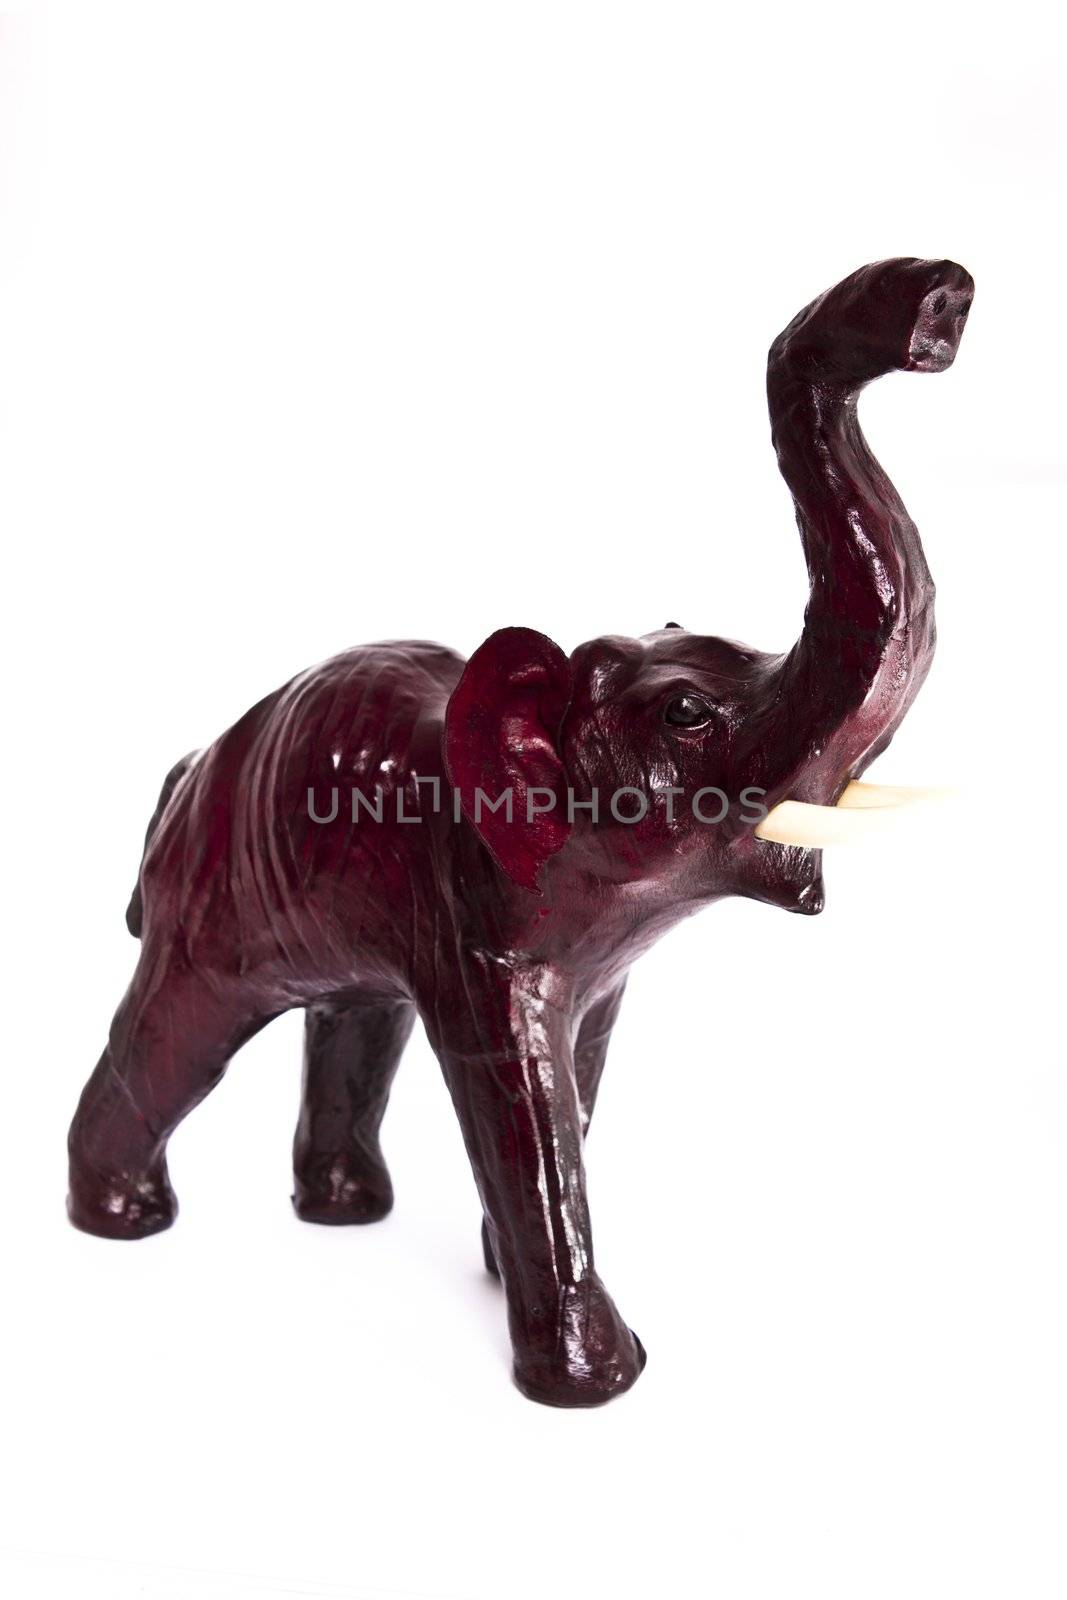 statuette of leather elephant on white background 